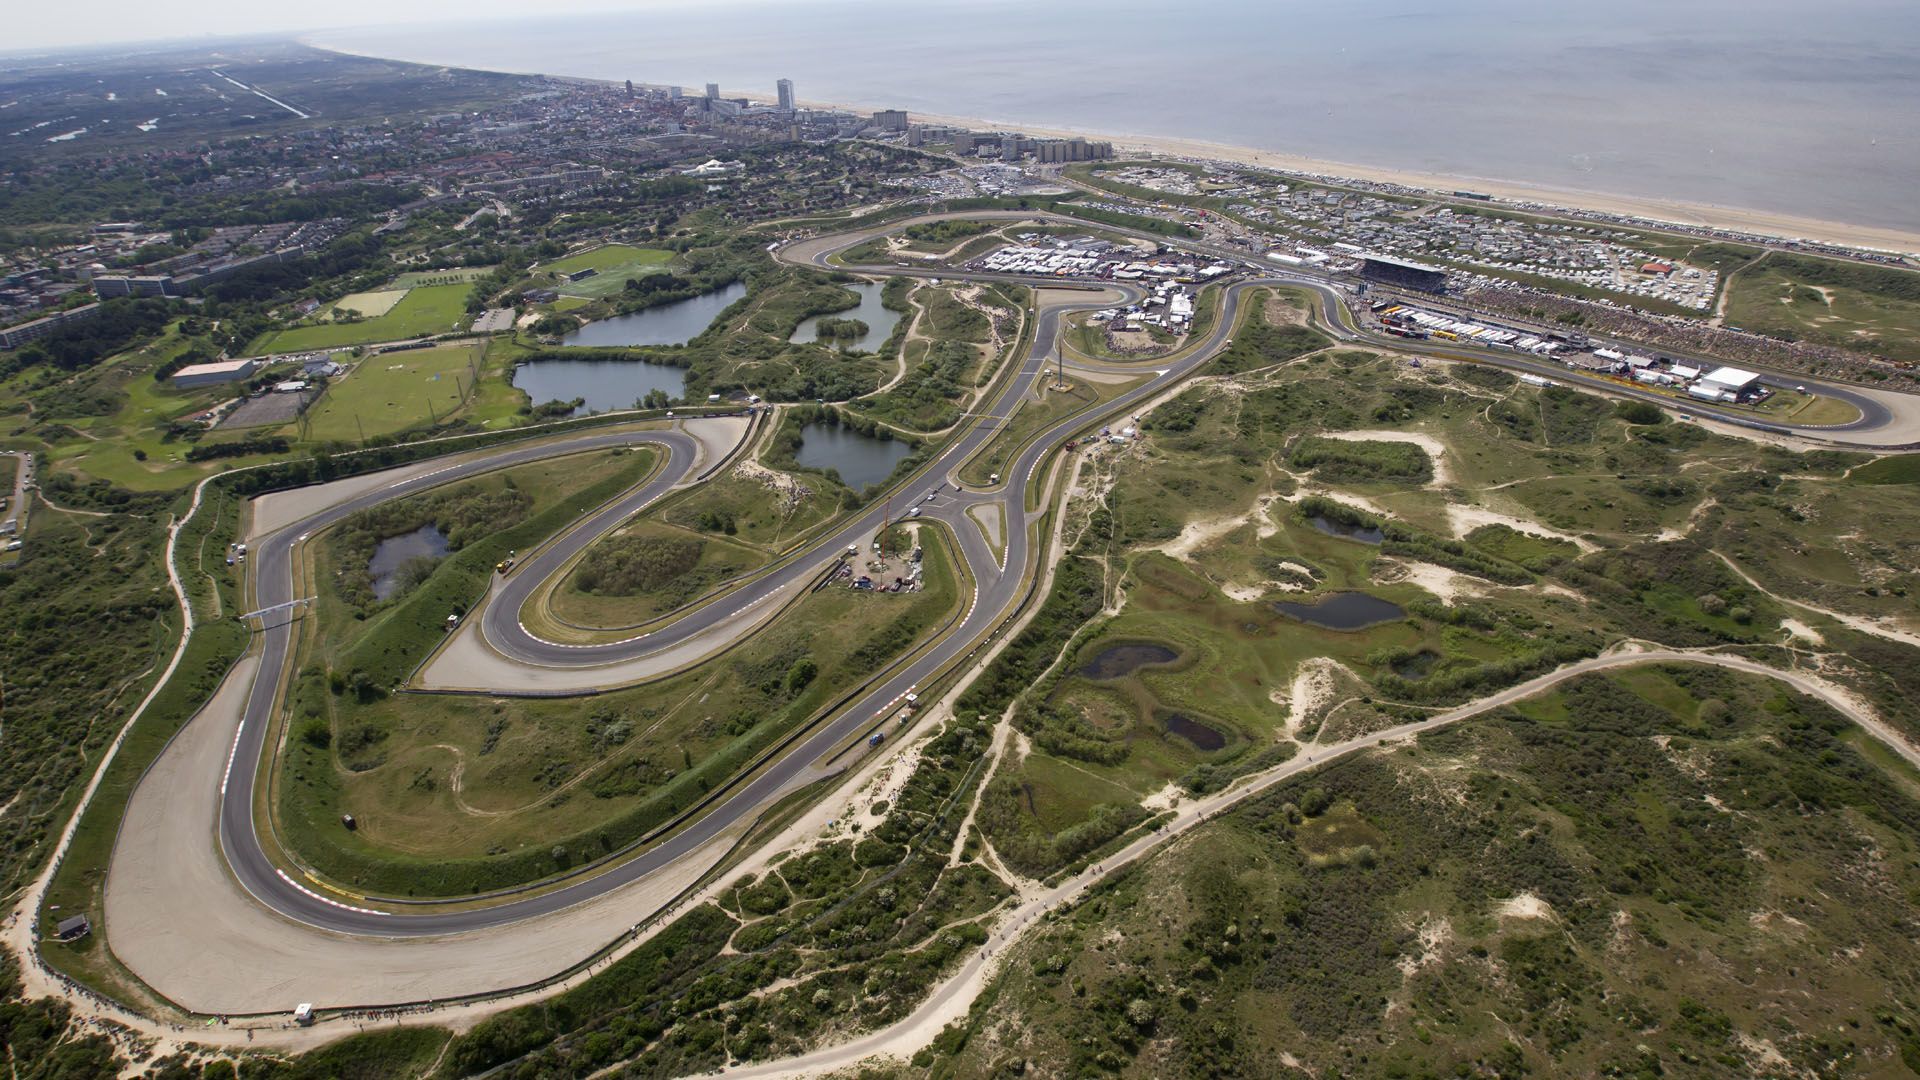 The F1 Dutch GP will be held regularly in  Zandvoort with a 67% crowd capacity 